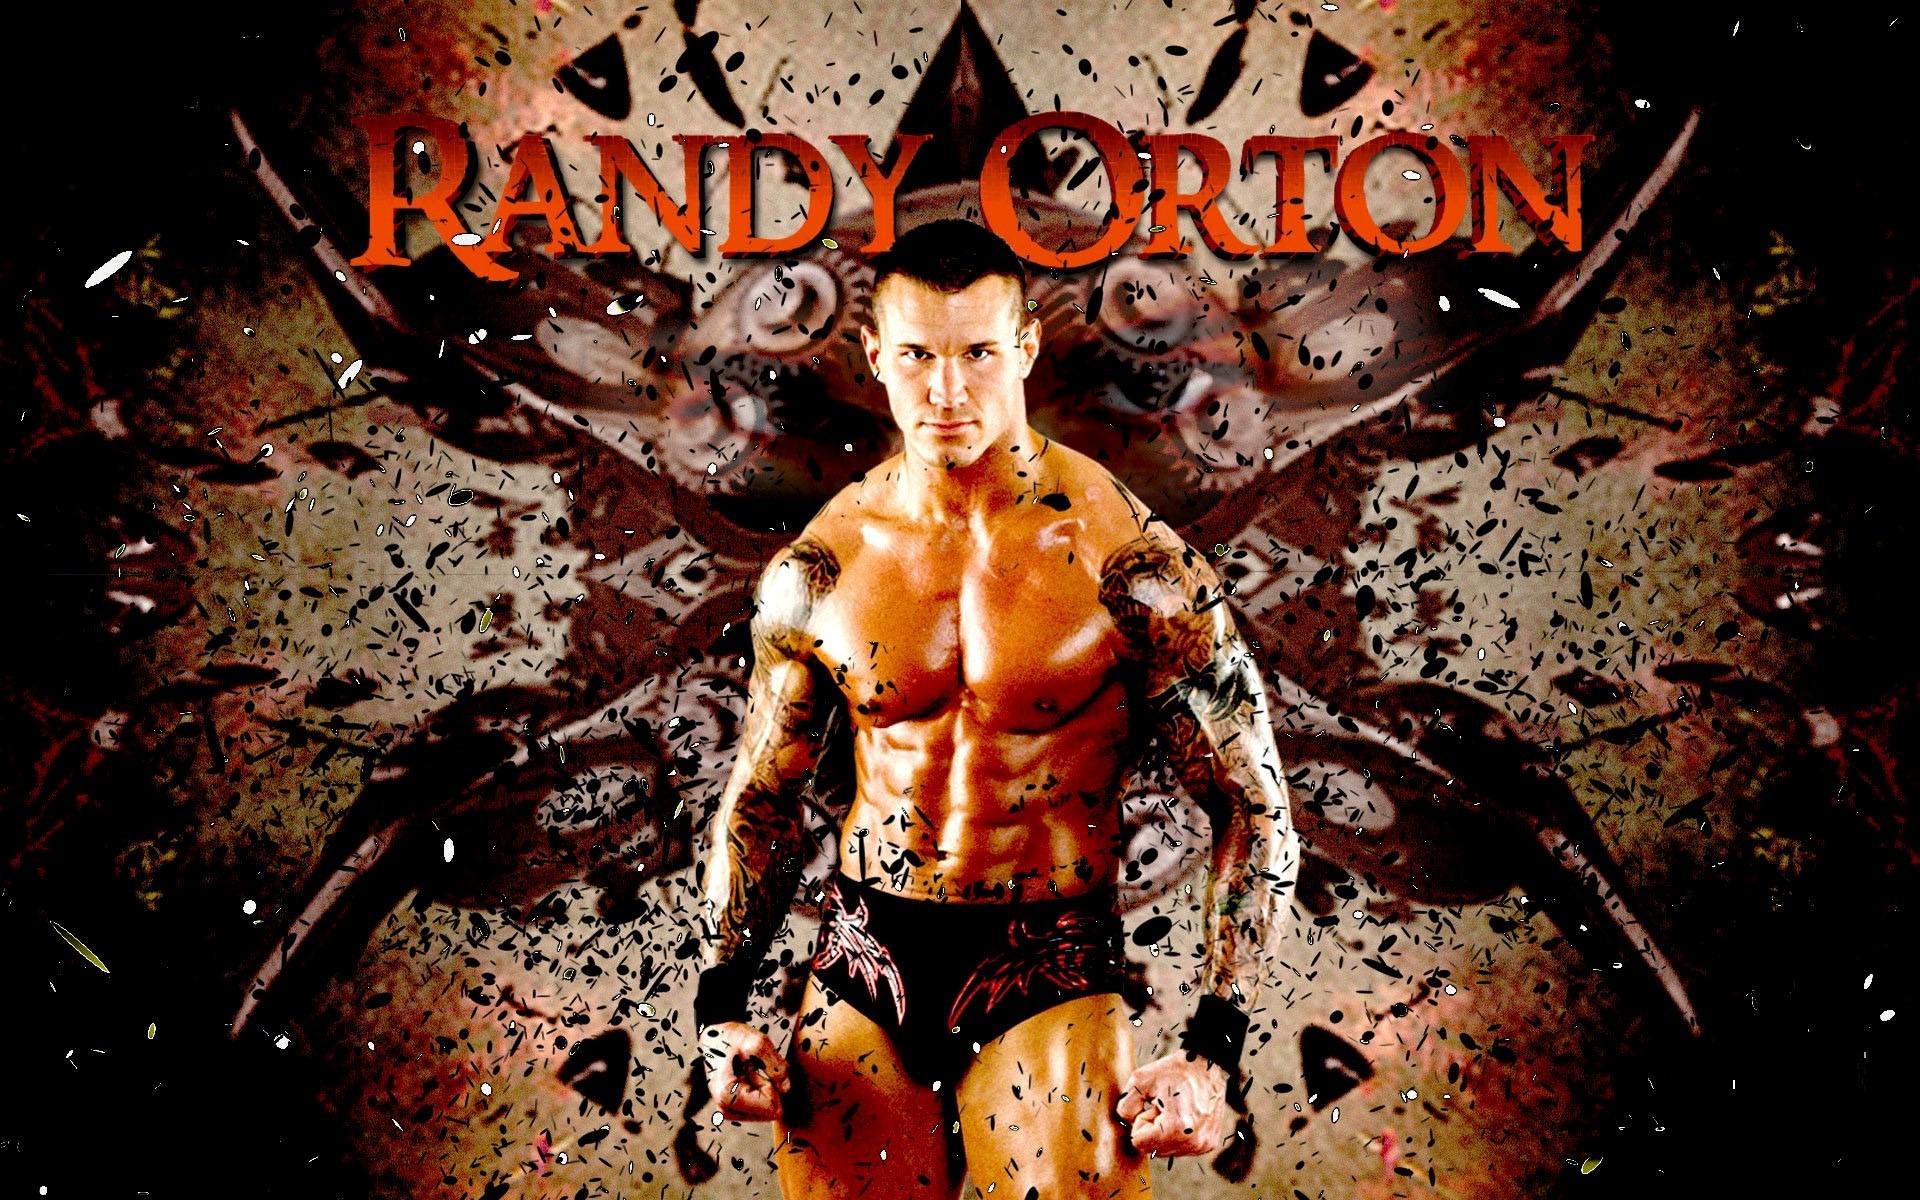 HD WWE Randy Orton Smiley Faces Wallpapers 2015 - Wallpaper Cave